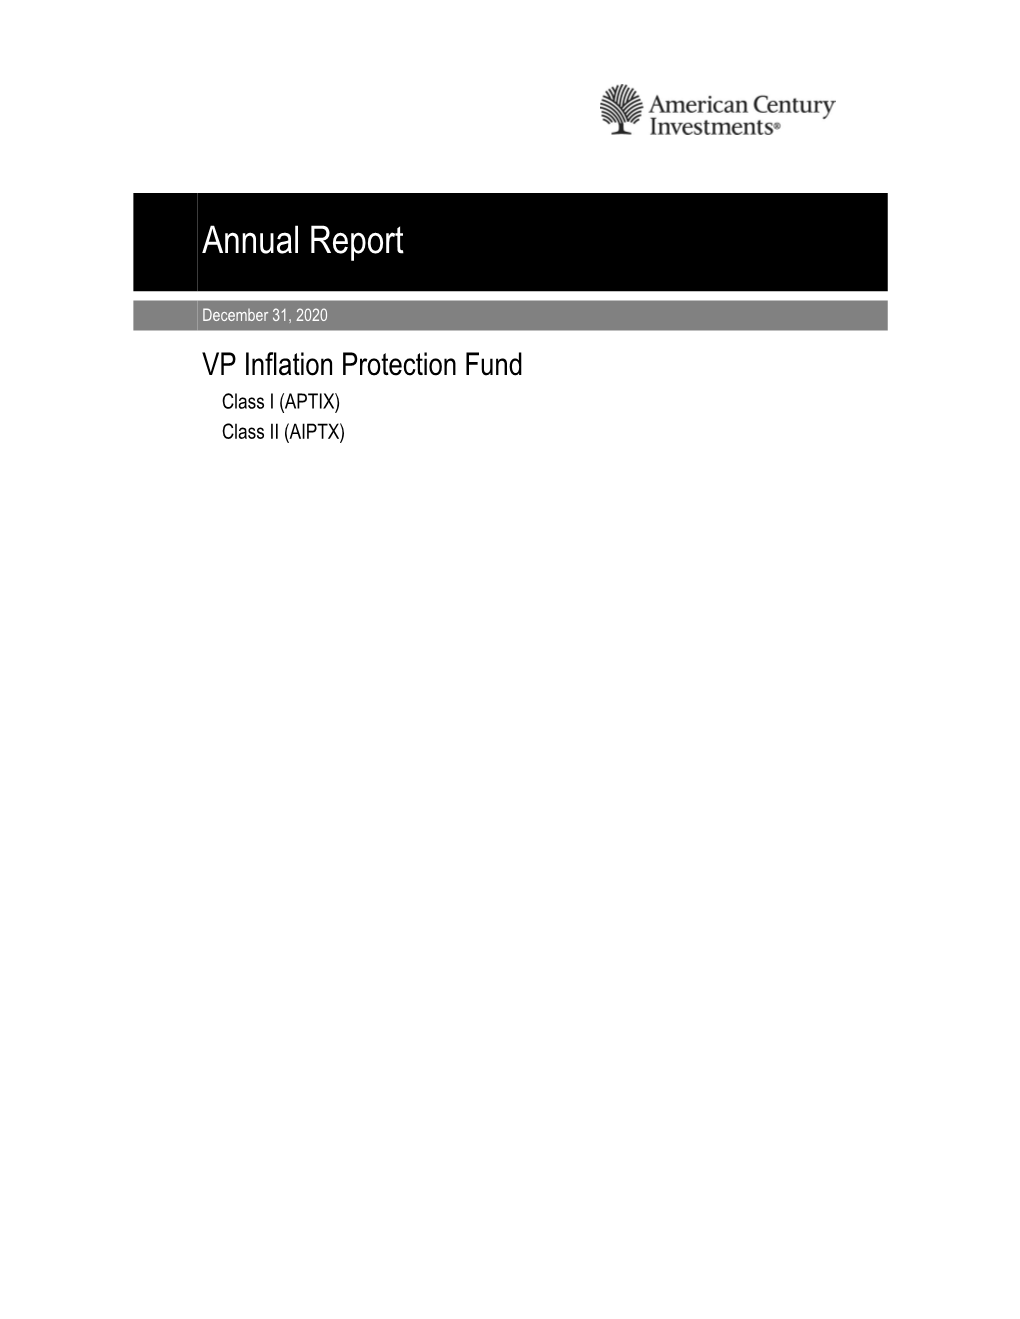 VP Inflation Protection Annual Report